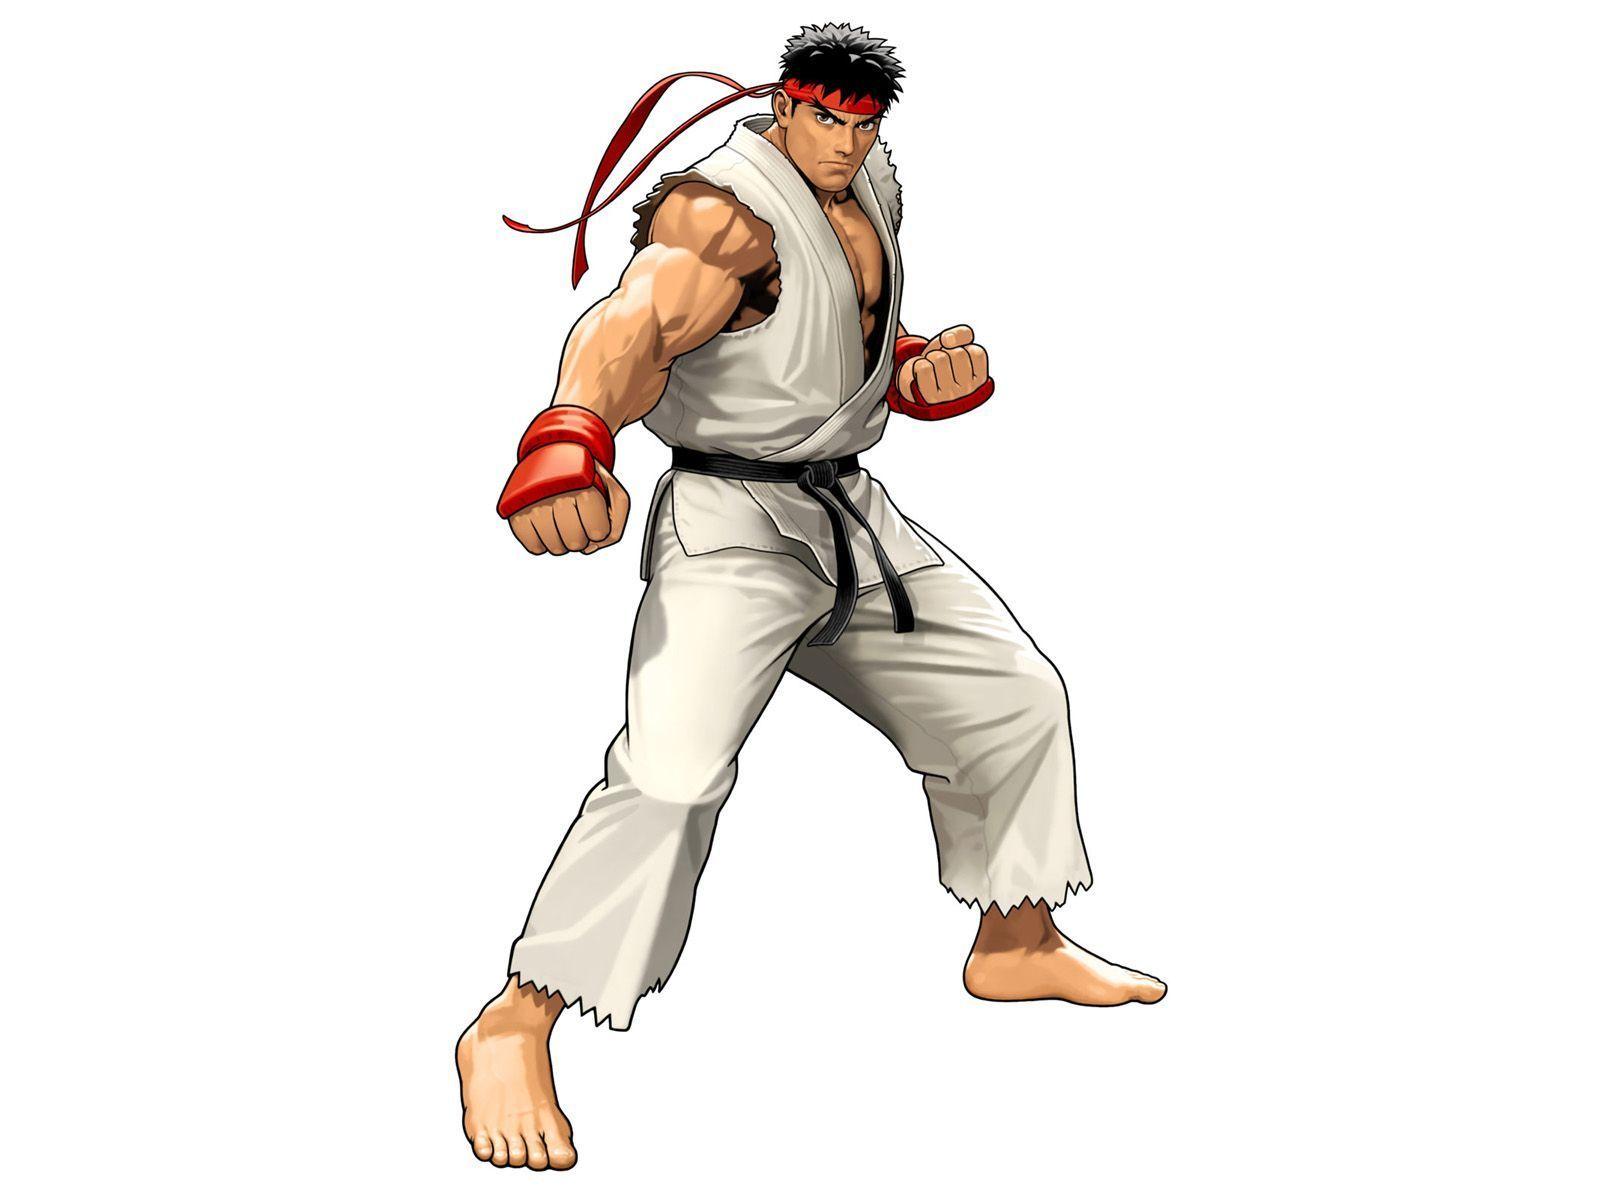 ryu from street fighter Wallpaper Background